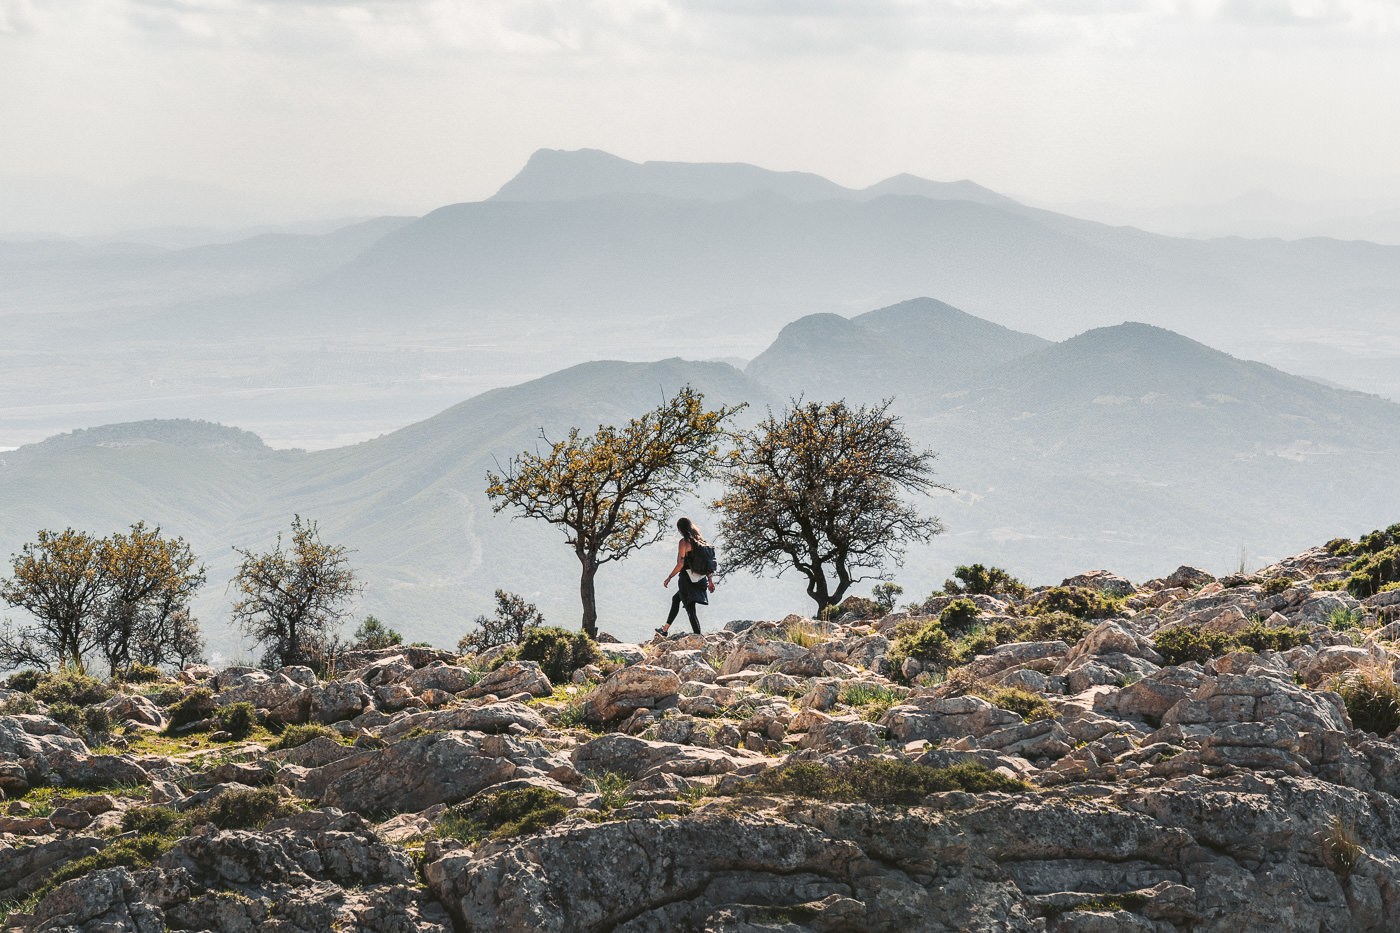 a person walking on a rocky hill with a view of mountains.